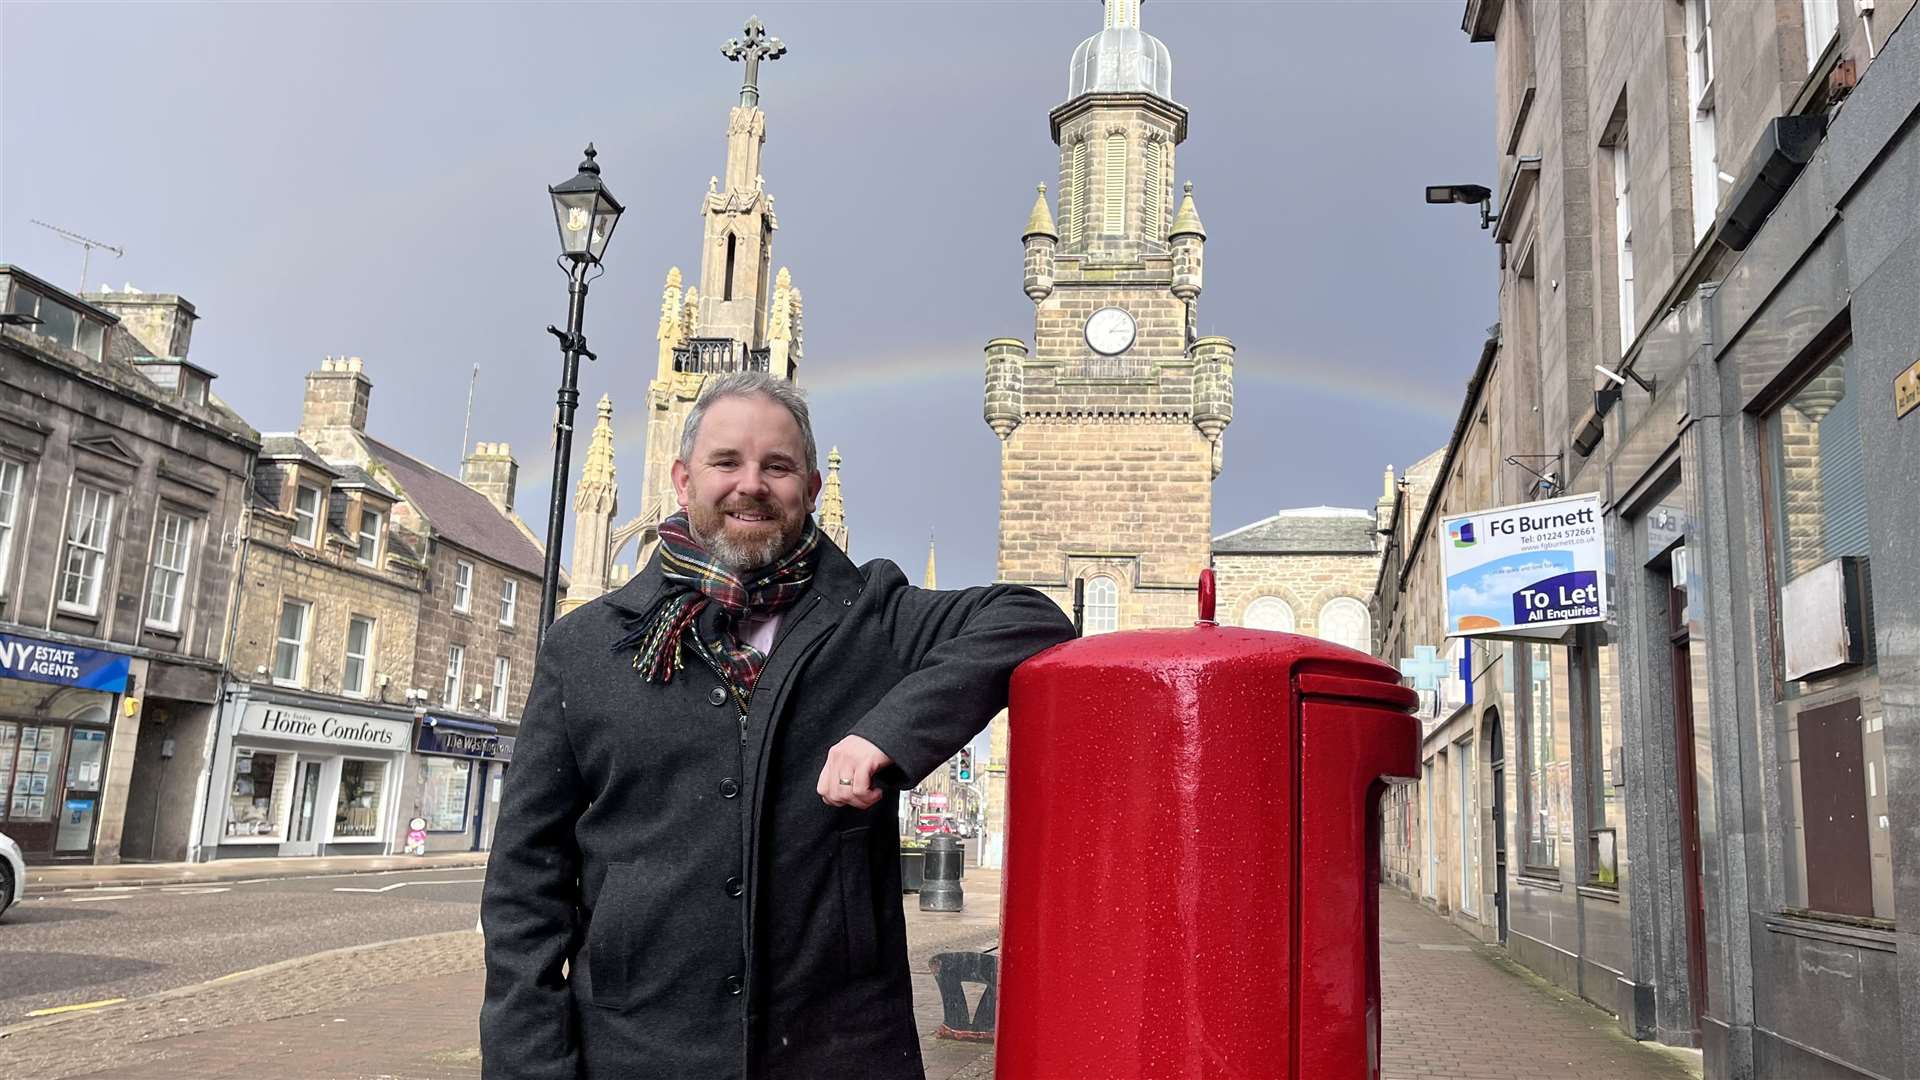 Familiar face and local council candidate for Forres, Scott Lawrence.